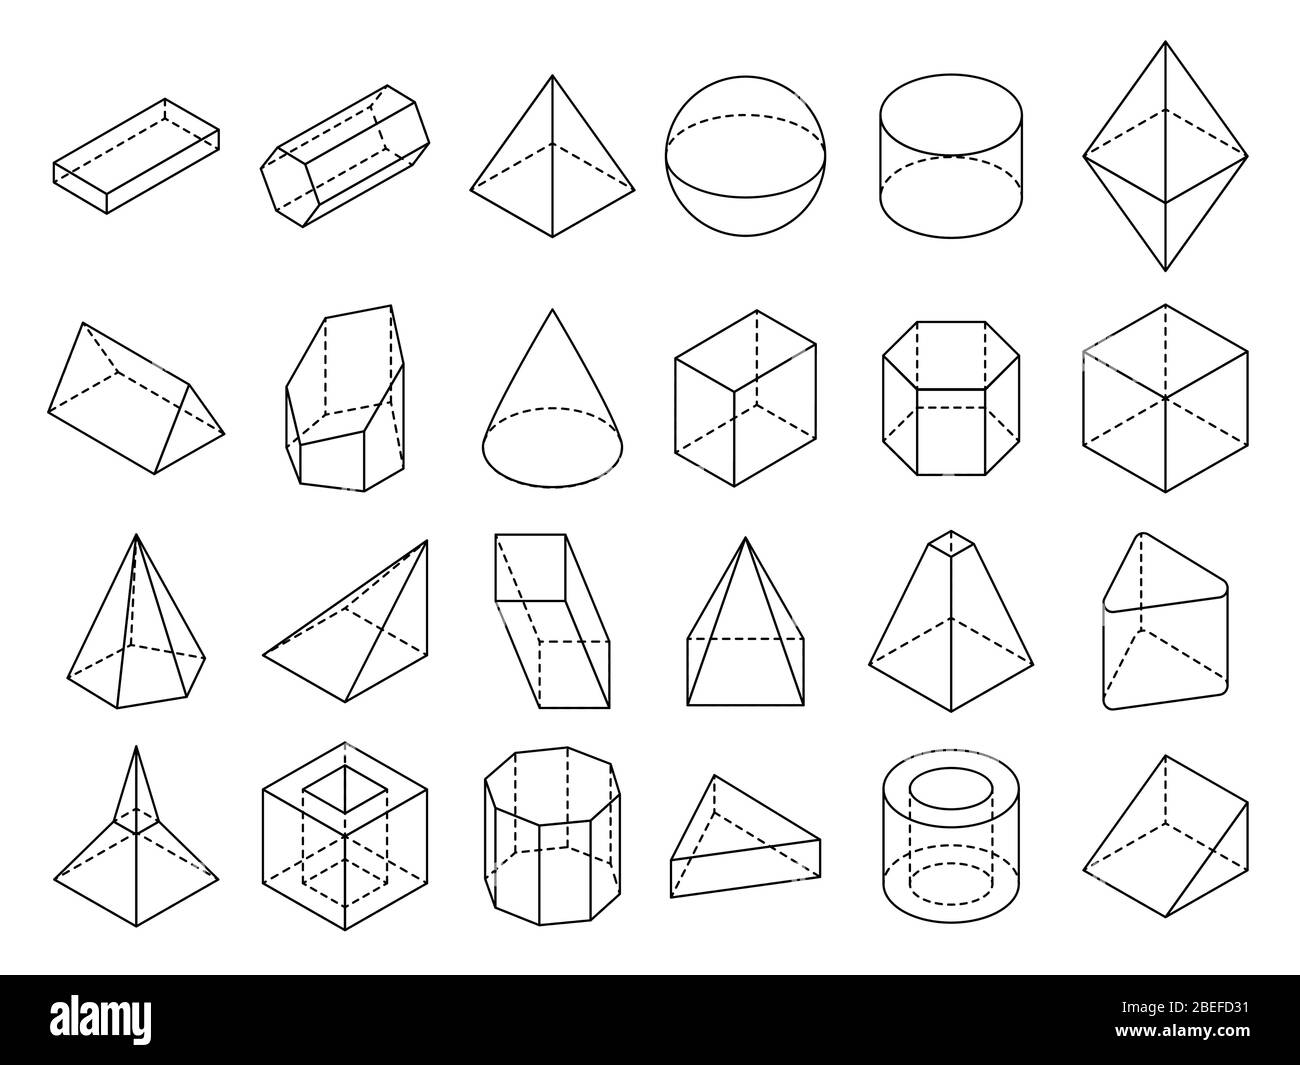 Realistic 3d basic shapes. Sphere shape with shadow, cube geometry